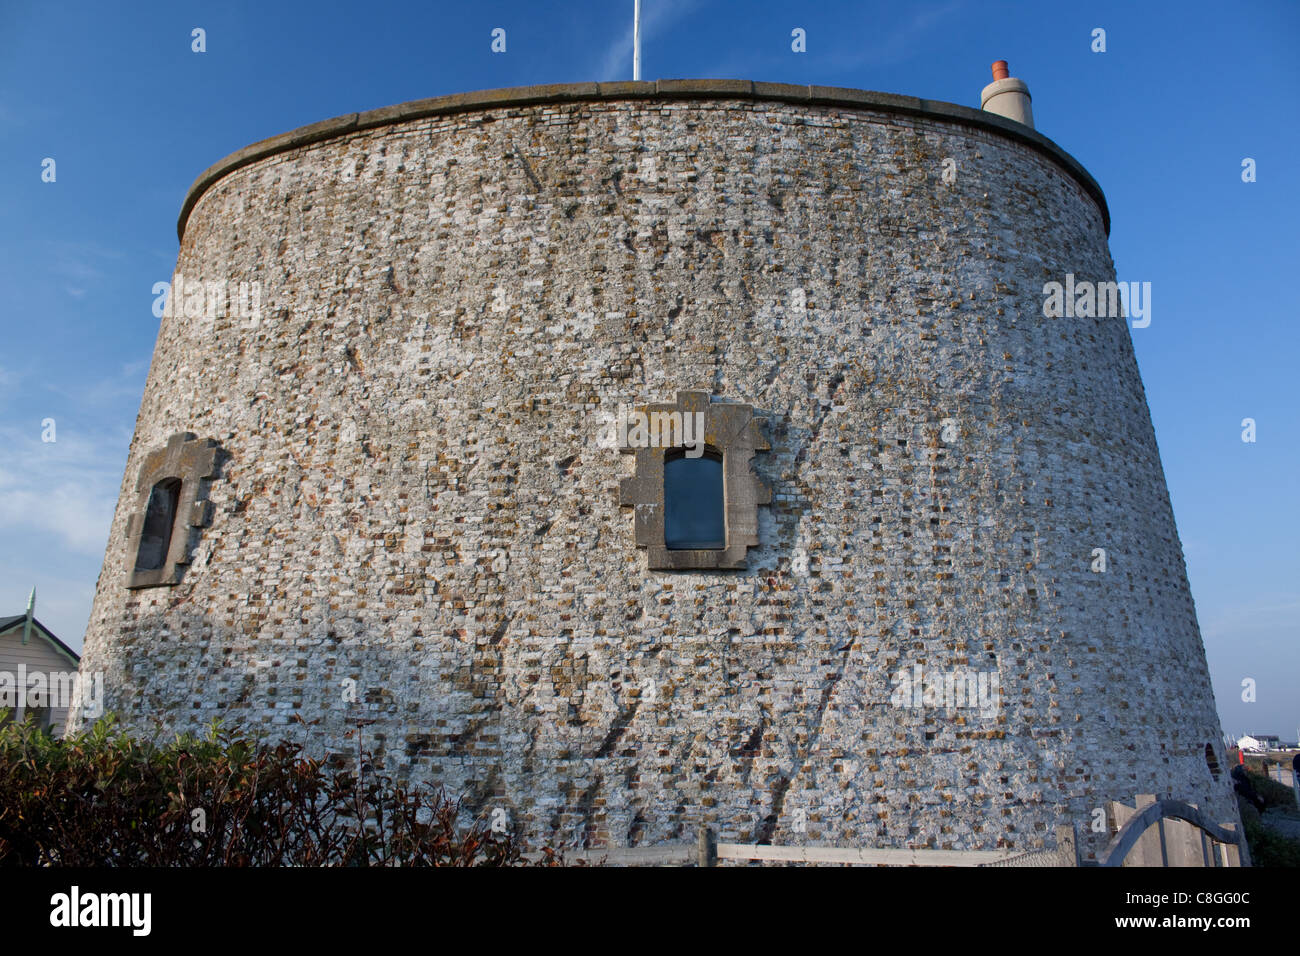 The Martello Tower at Felixstowe Ferry in the Suffolk Coast near the mouth of the Deben Estuary Stock Photo